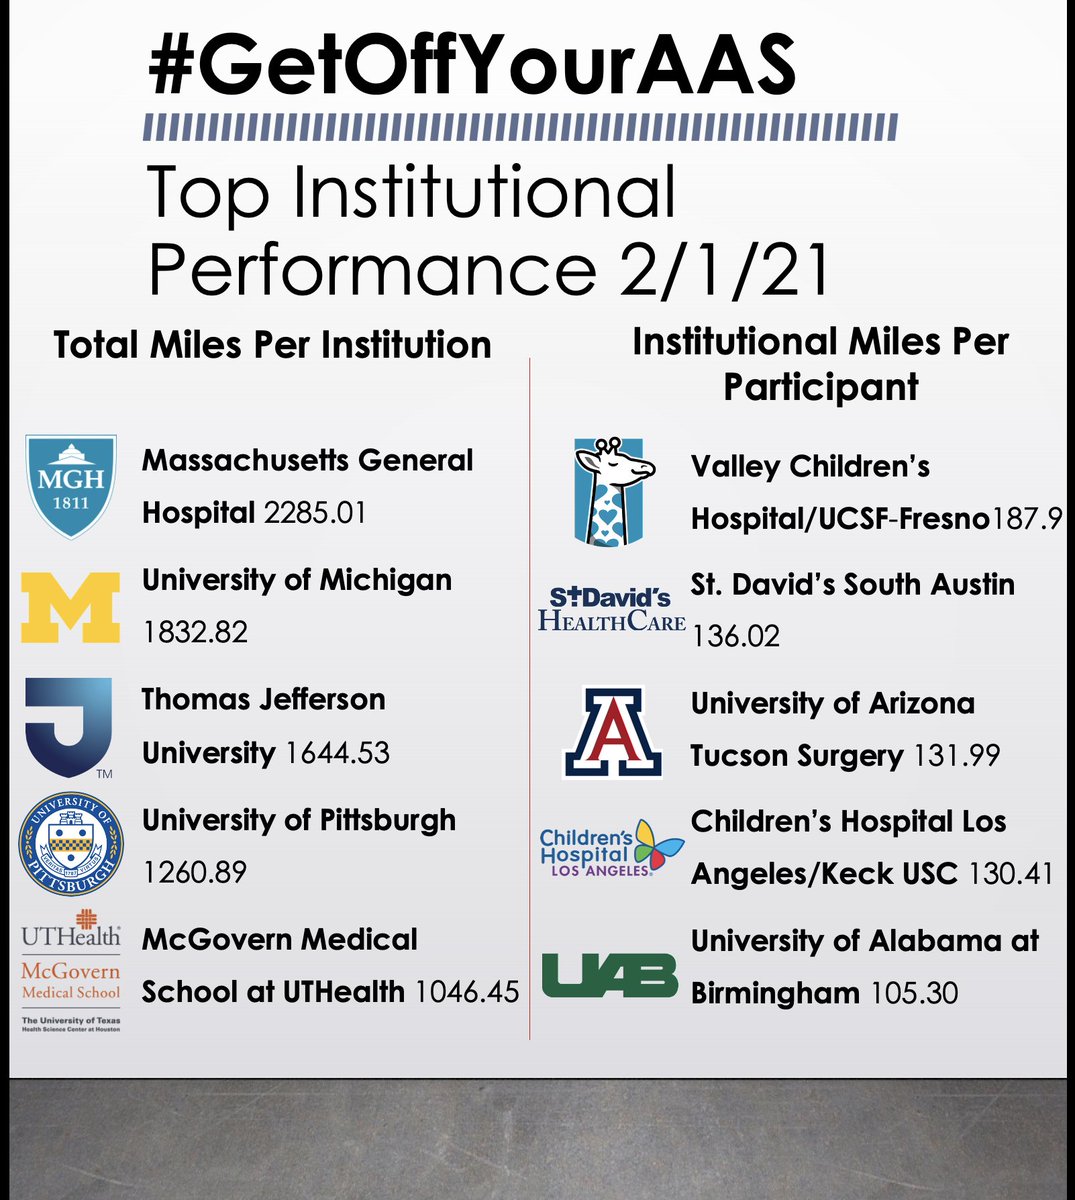 shout out to @UABSurgery - made it onto our institutional leaderboard for day 4 of #GetOffYourAAS! 

today is the final day for you to rally your teams and your institutions - who has the endurance??

💪🏿💪🏾💪🏽💪🏼💪🏻💪💪🏻💪🏼💪🏽💪🏾💪🏿

#ASC2021